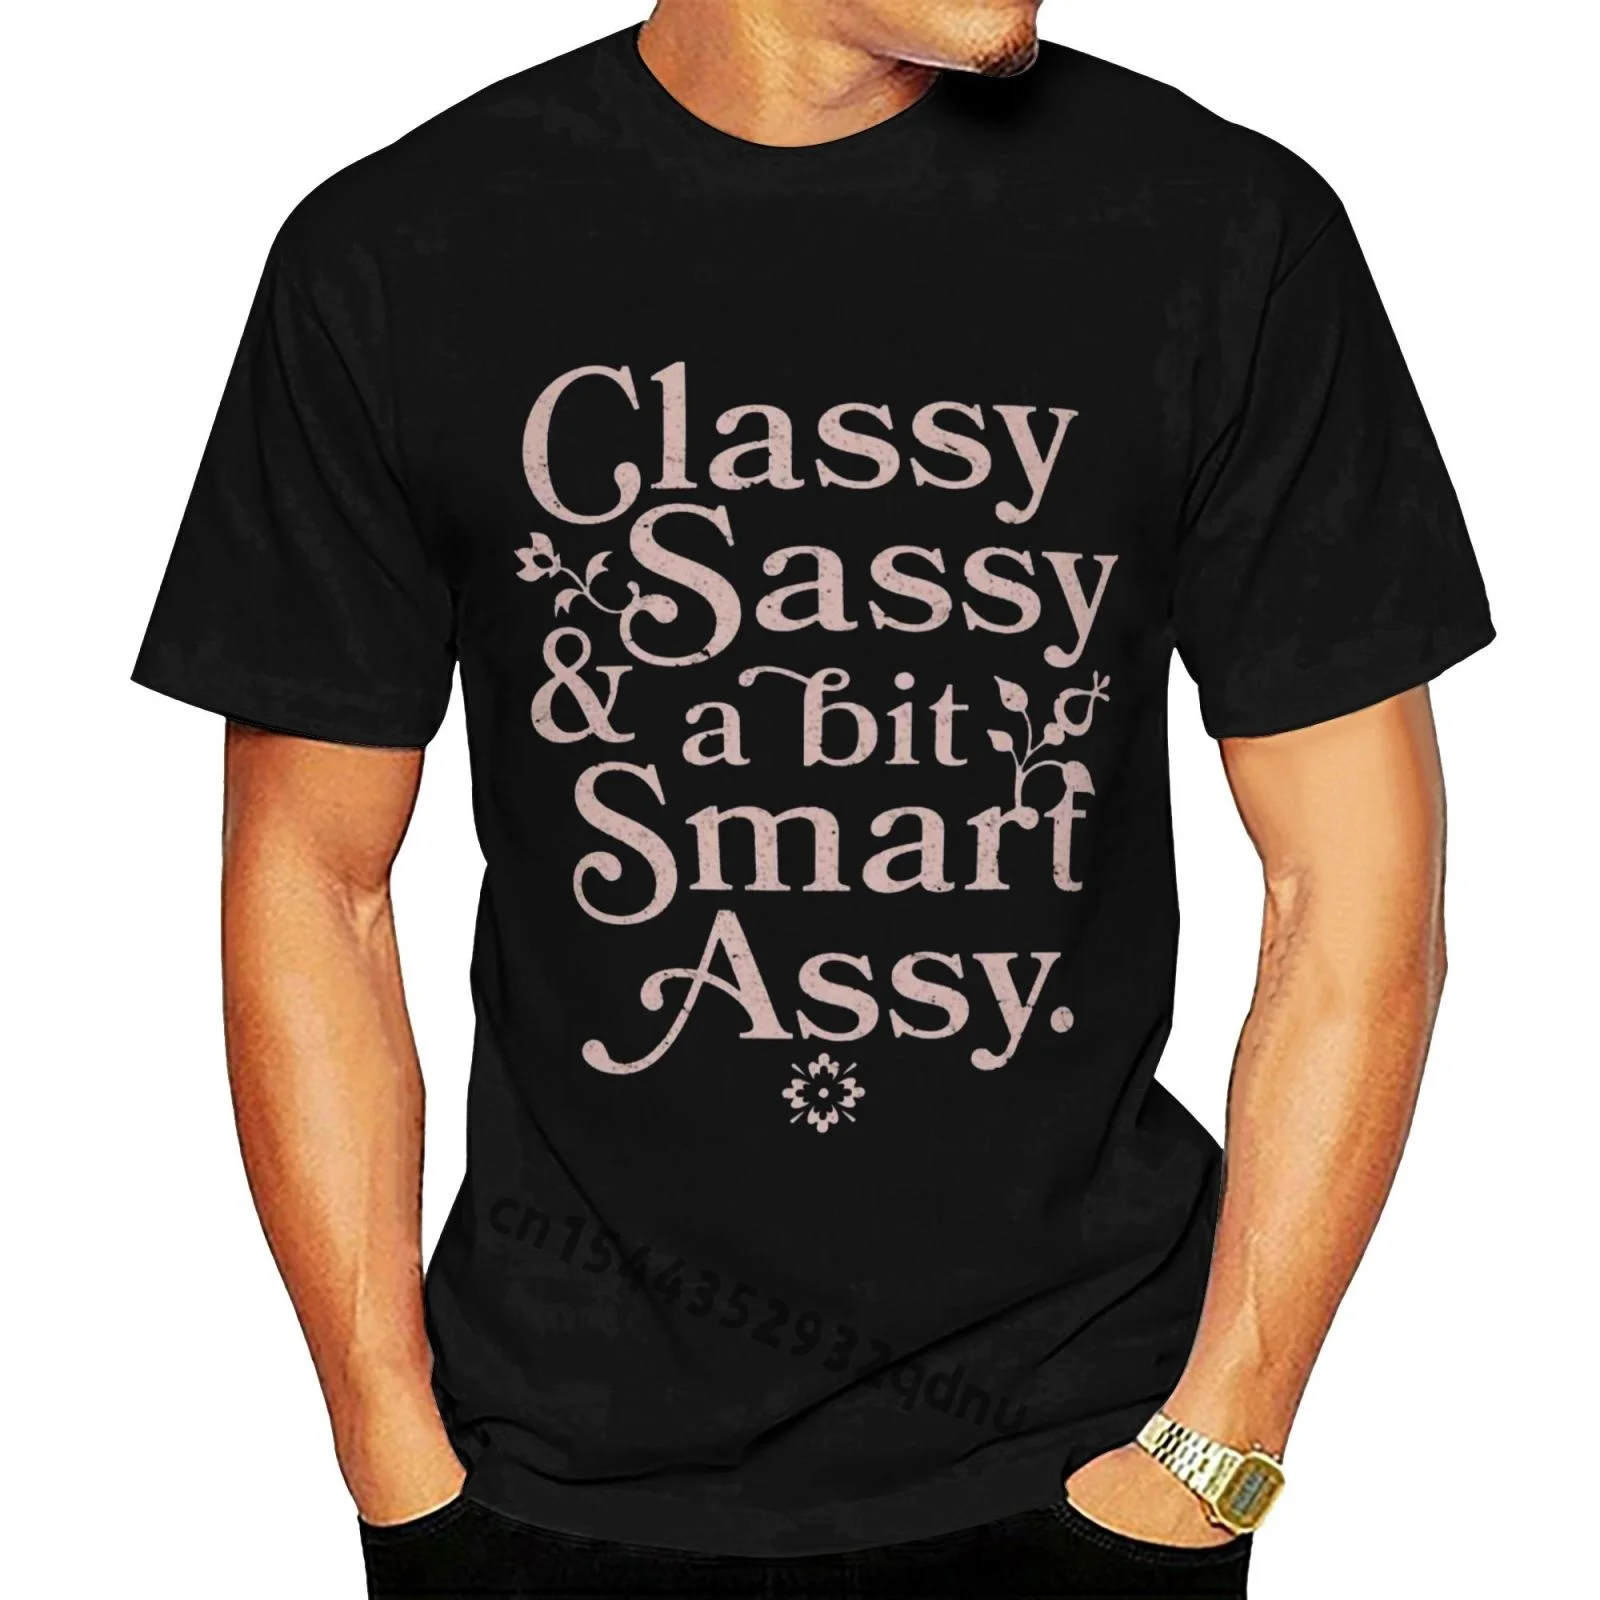 

Classy Sassy & A Bit Smart Assy Boy Funny Mashup Black T-Shirt For Youth Middle-Age Old Age Tee Shirt